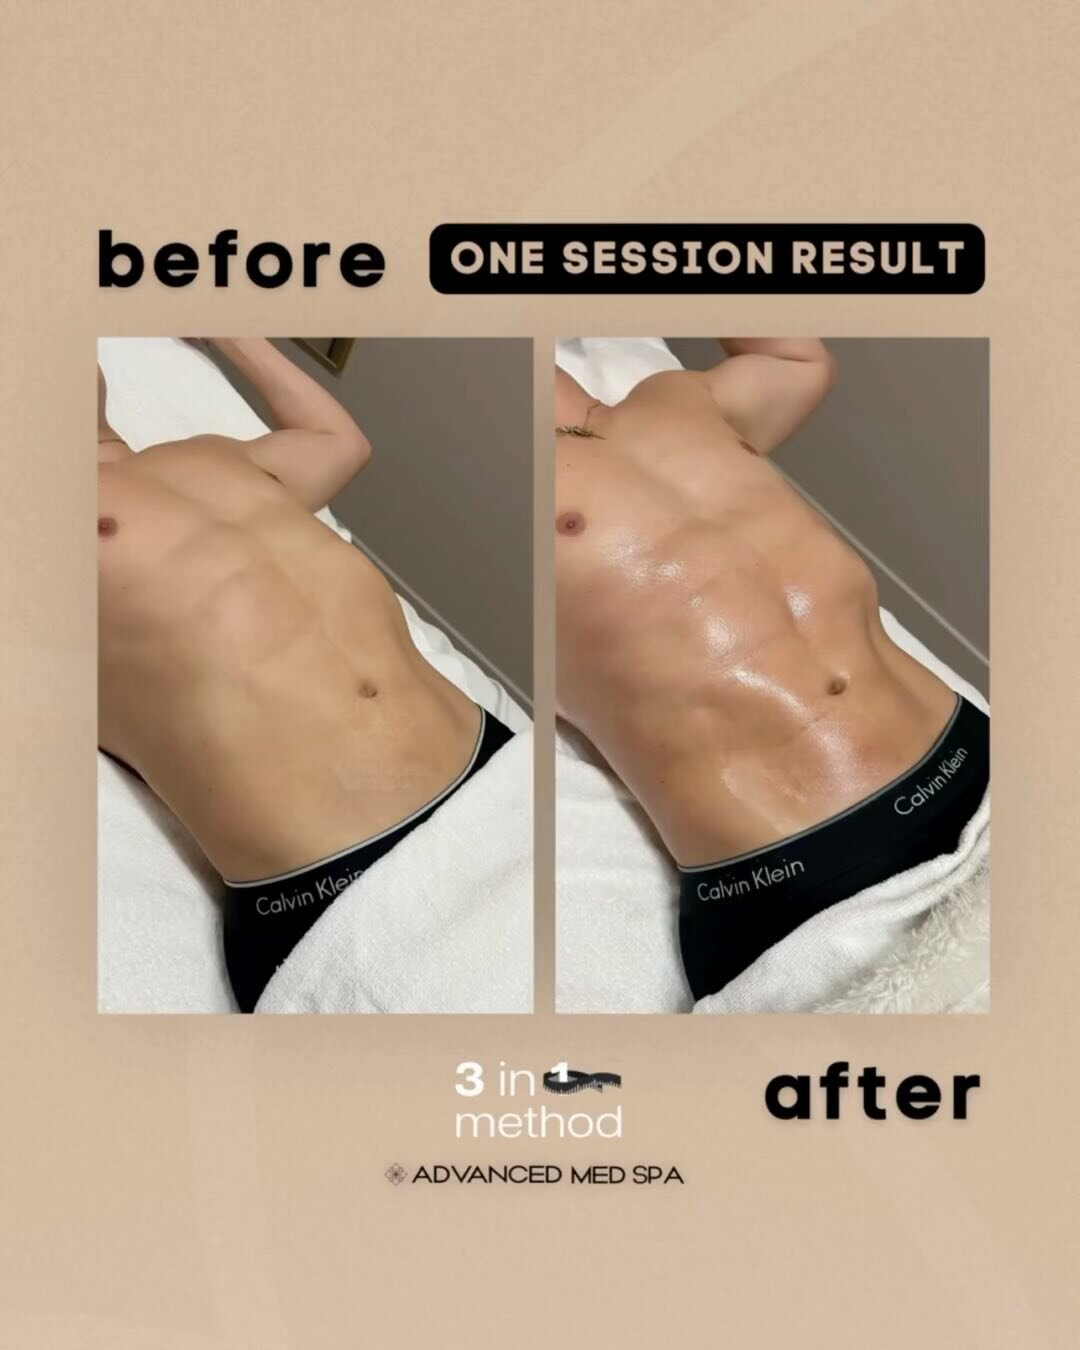 ONE HOUR DIFFERENCE 😍⁠
This is our signature Brazilian lymphatic drainage procedure, the 3 in 1 Method 👐🏼⁠
⁠
While this treatment is amazing year-round, our patients love it even more during the busy holiday season 🎅🏼🎄 WHY? ⁠
⁠
Because it&rsquo